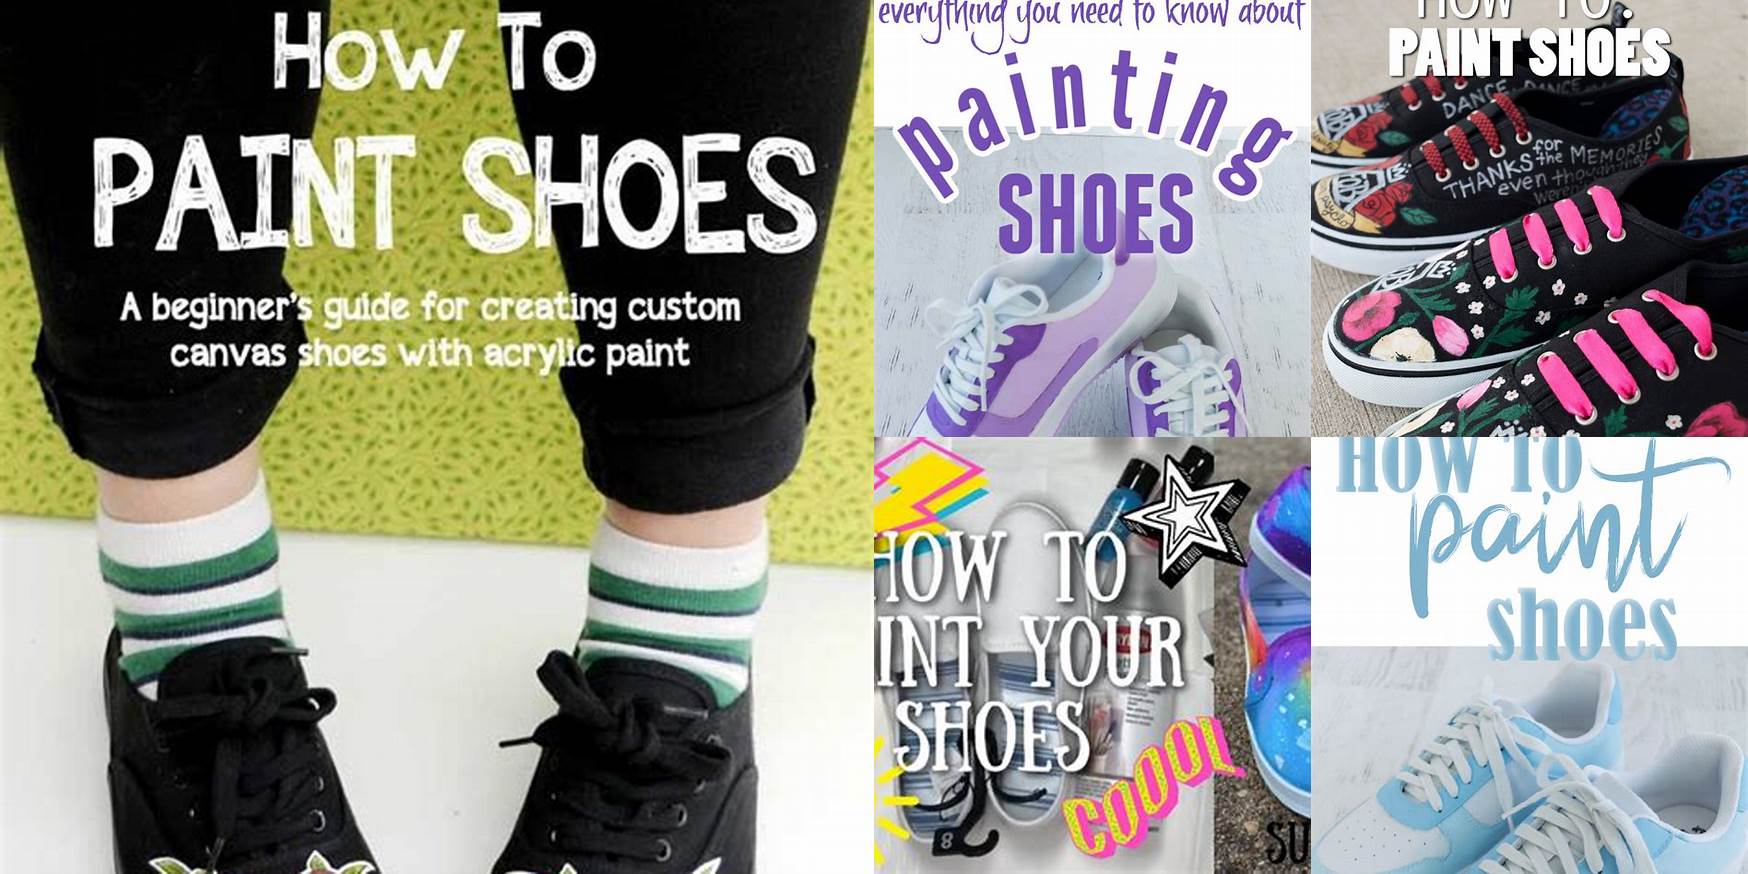 What Do You Need To Paint Shoes